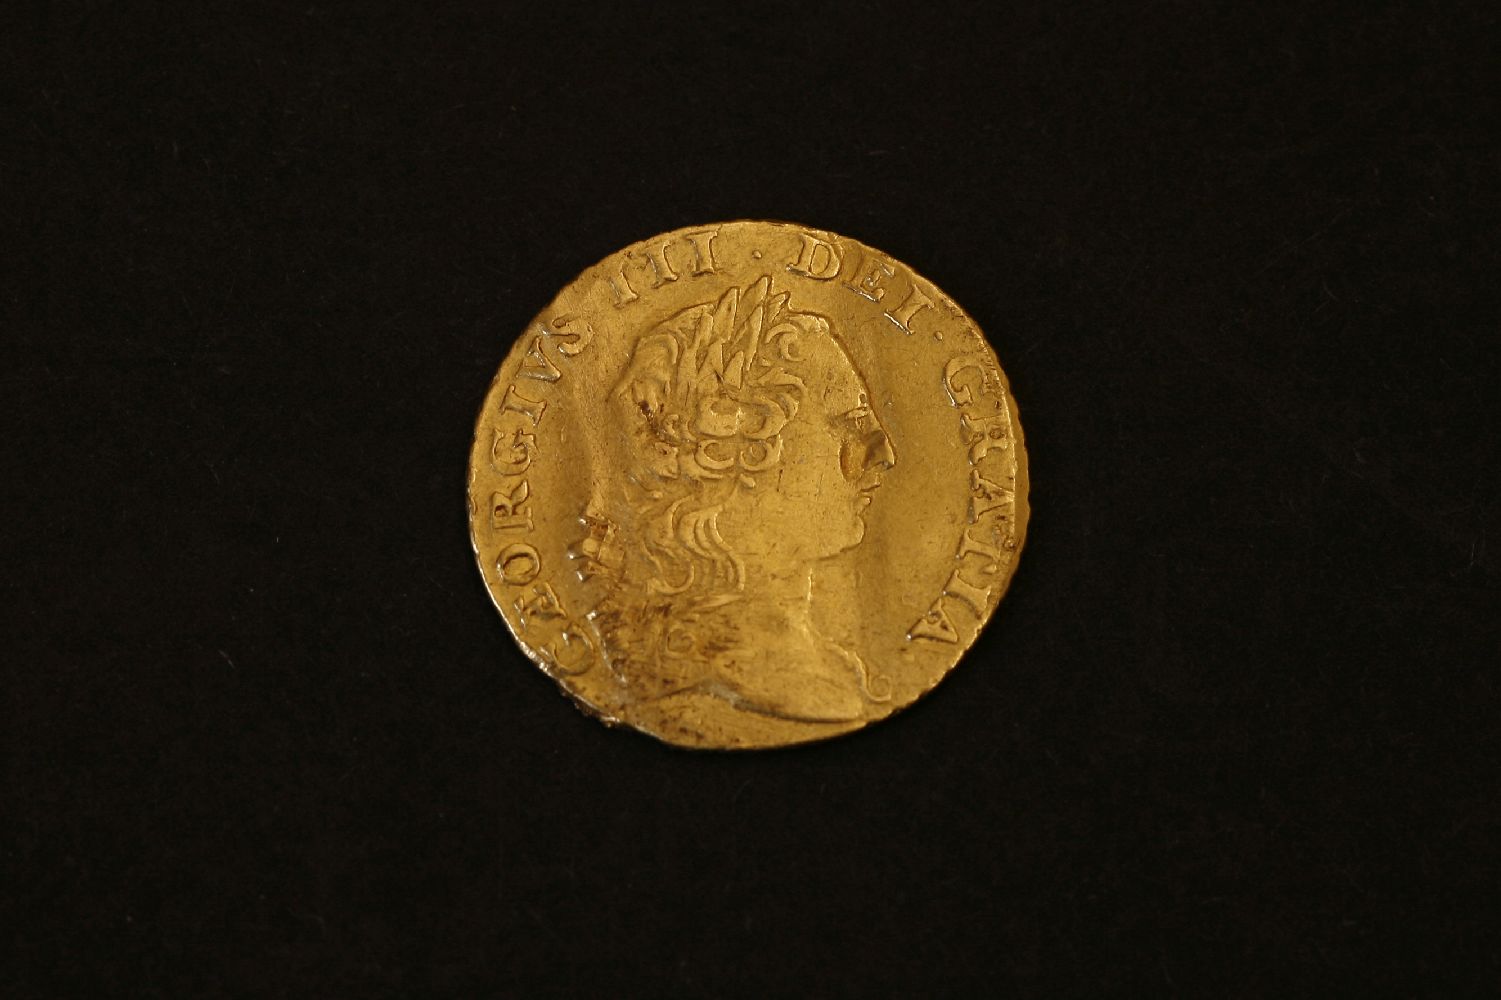 Great Britain, George III (1760 - 1820), Quarter Sovereign, 1762 (S. 3741)